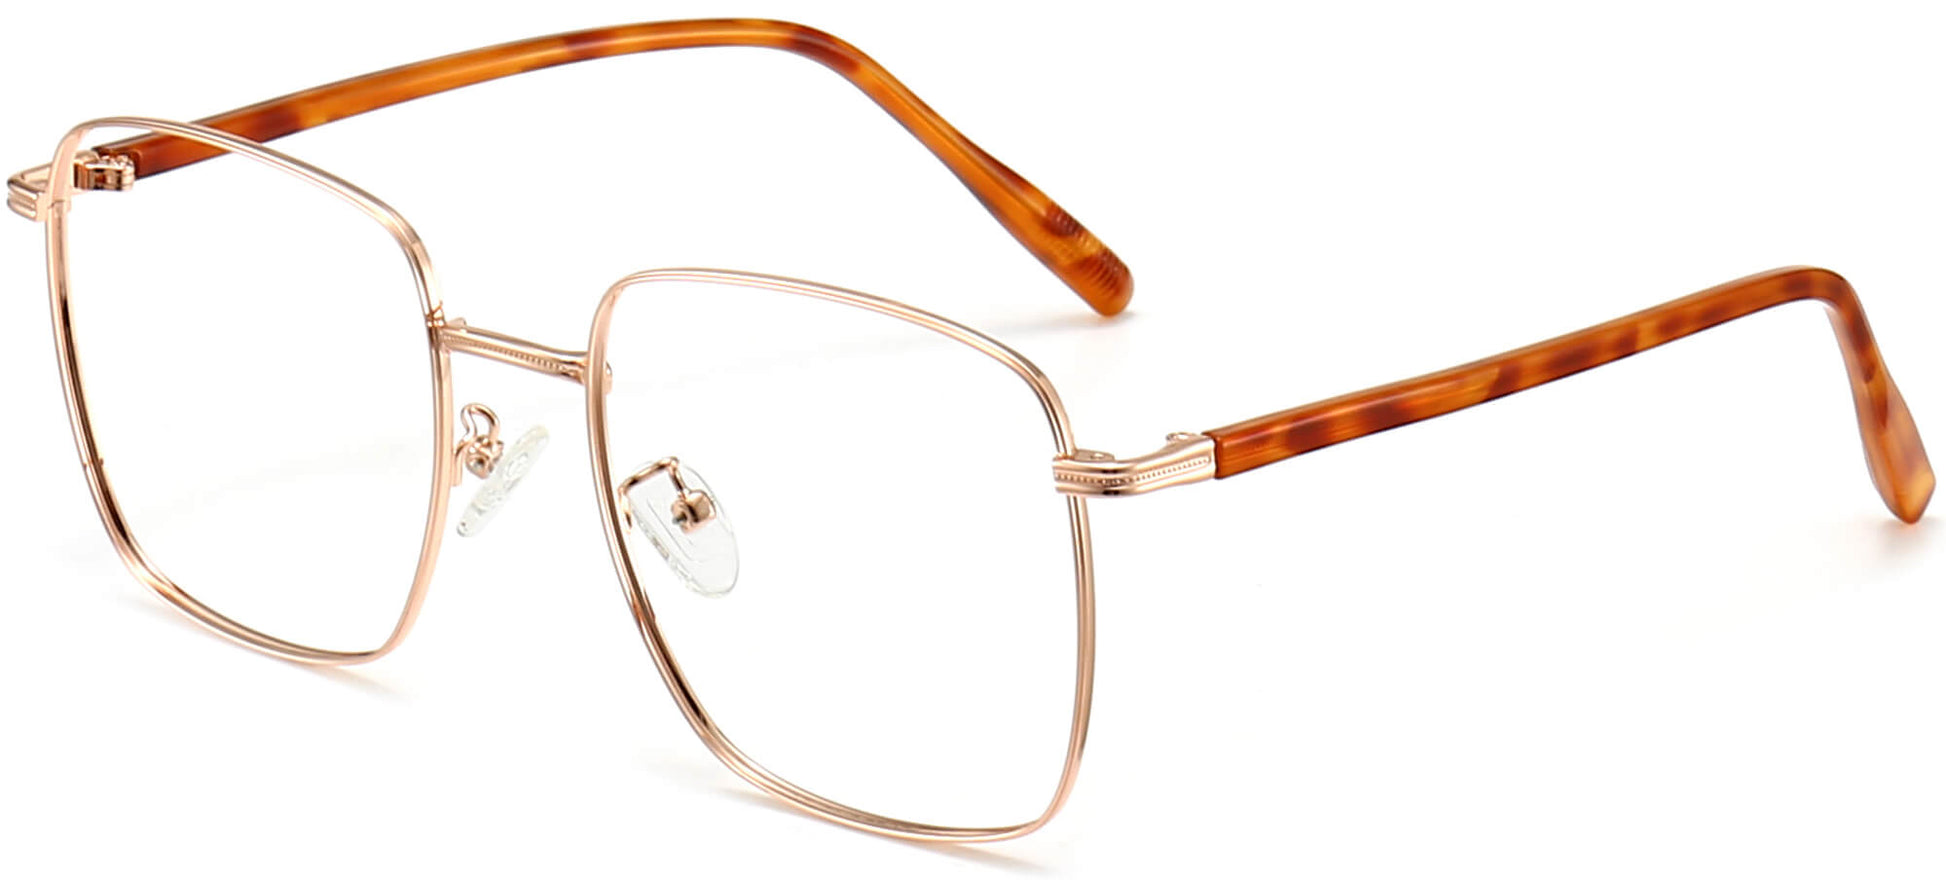 Cadence Square Gold Eyeglasses from ANRRI, angle view